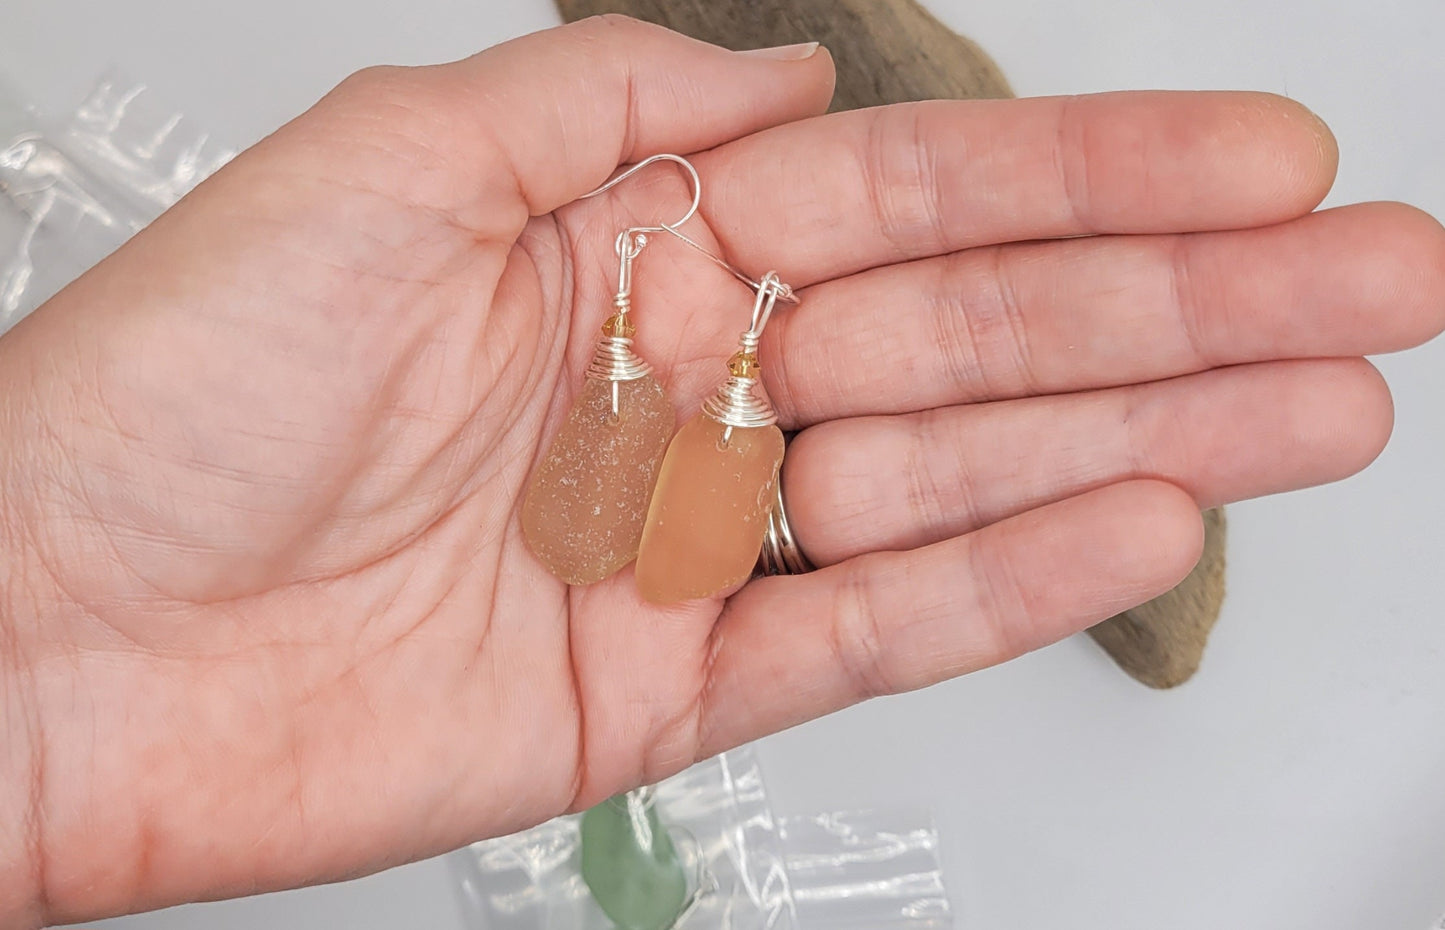 Genuine Sea Glass/Peach Sea Glass Earrings/Sea Glass and Sterling Silver Earrings/Gift for Her